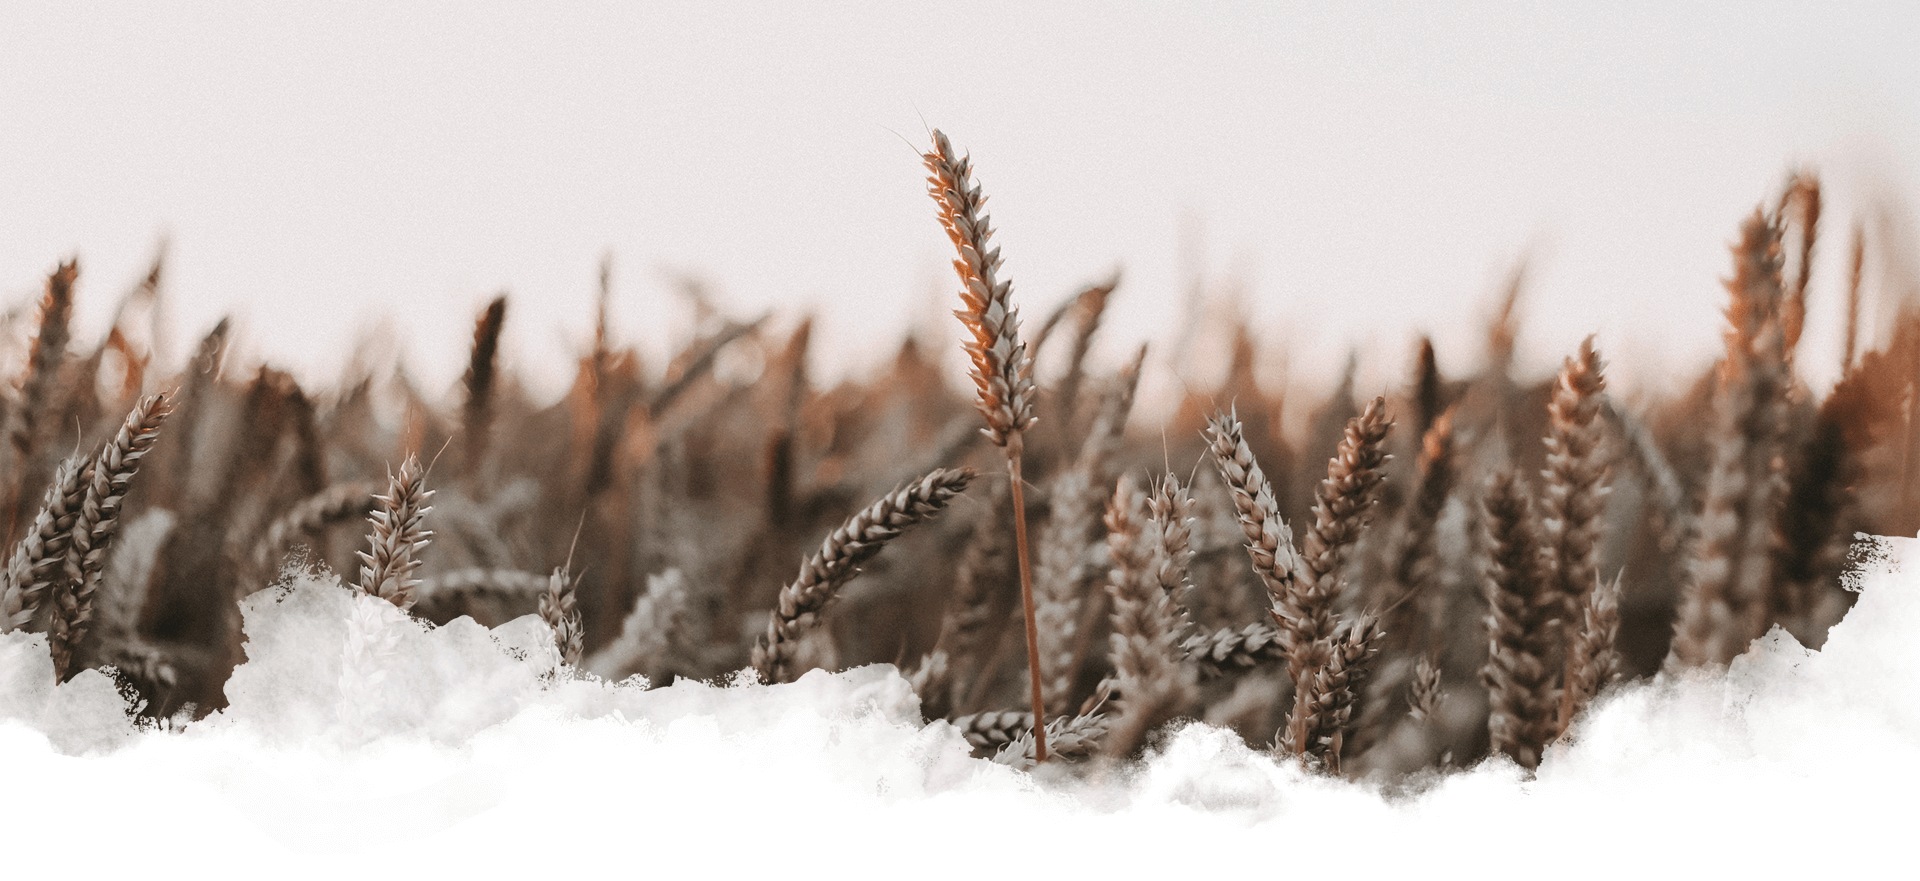 A close up of some grass in the snow